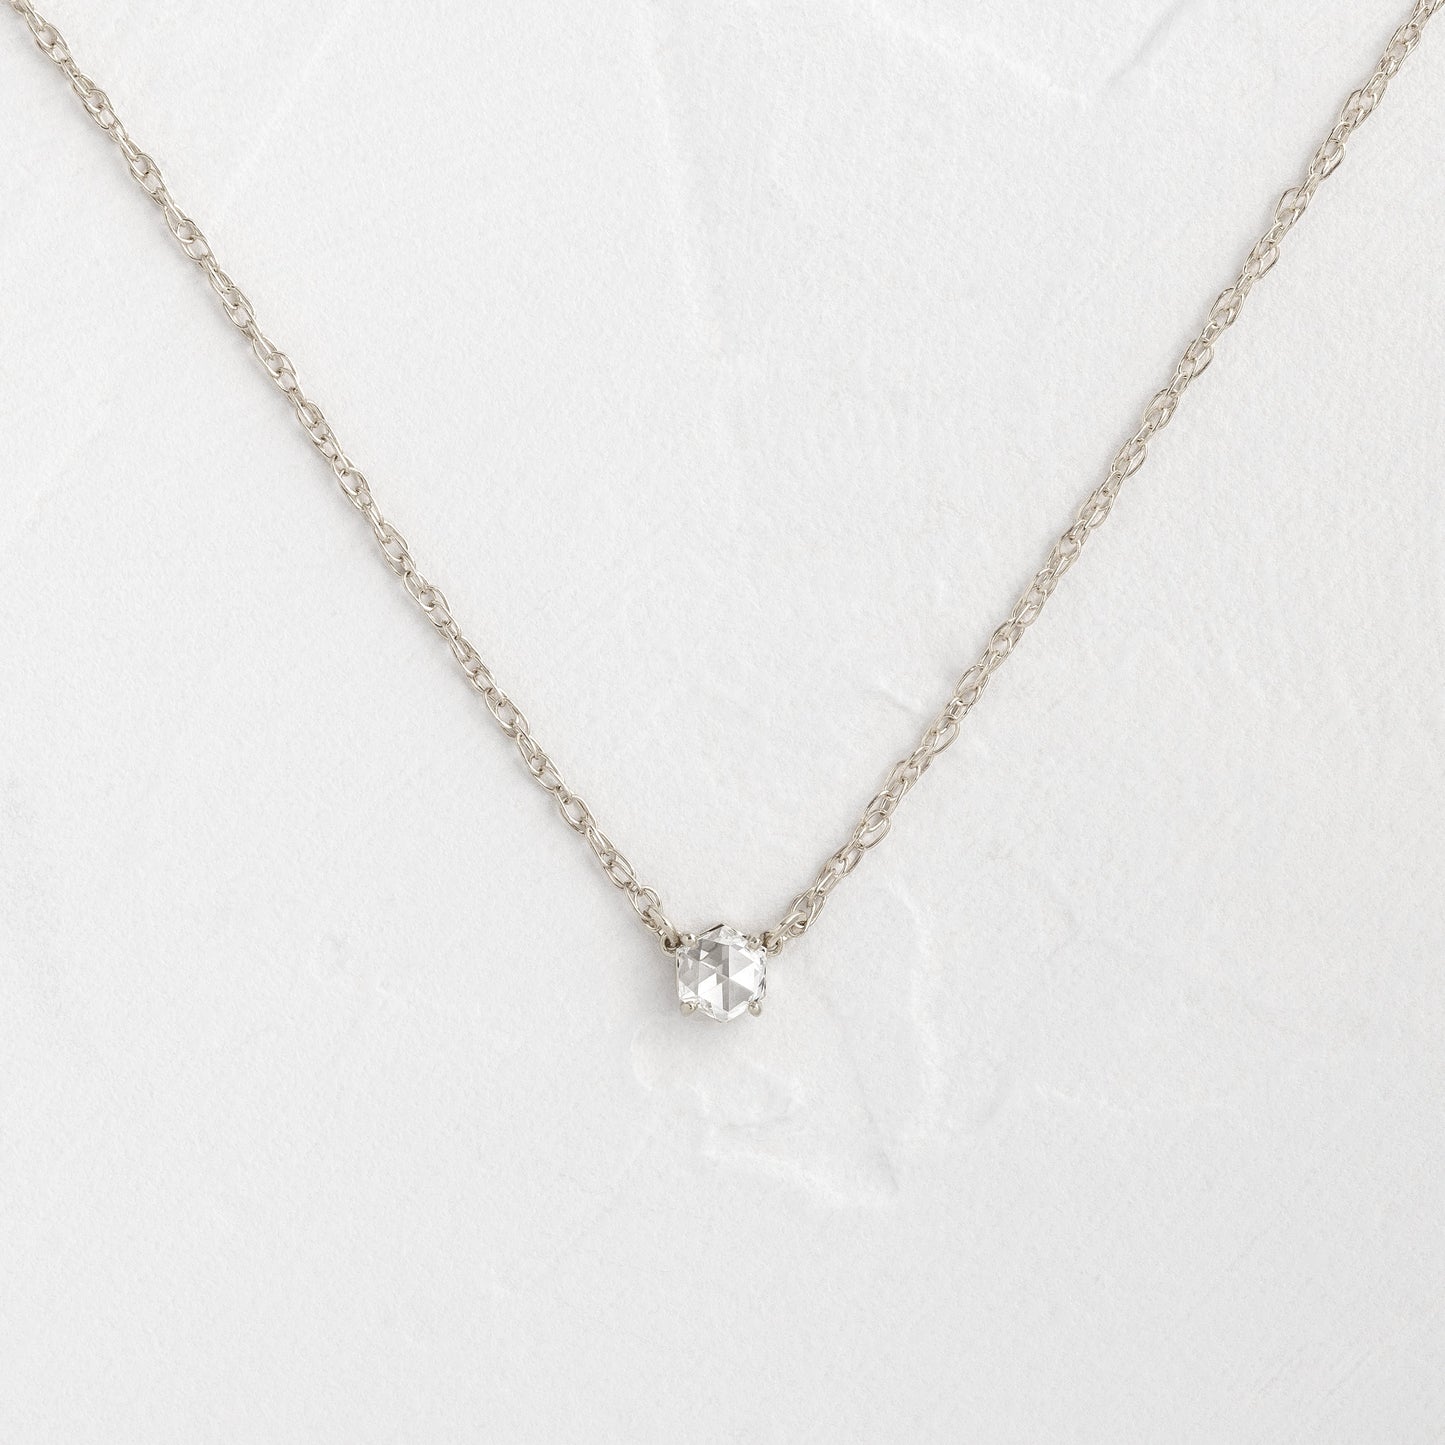 Prism Necklace - In Stock